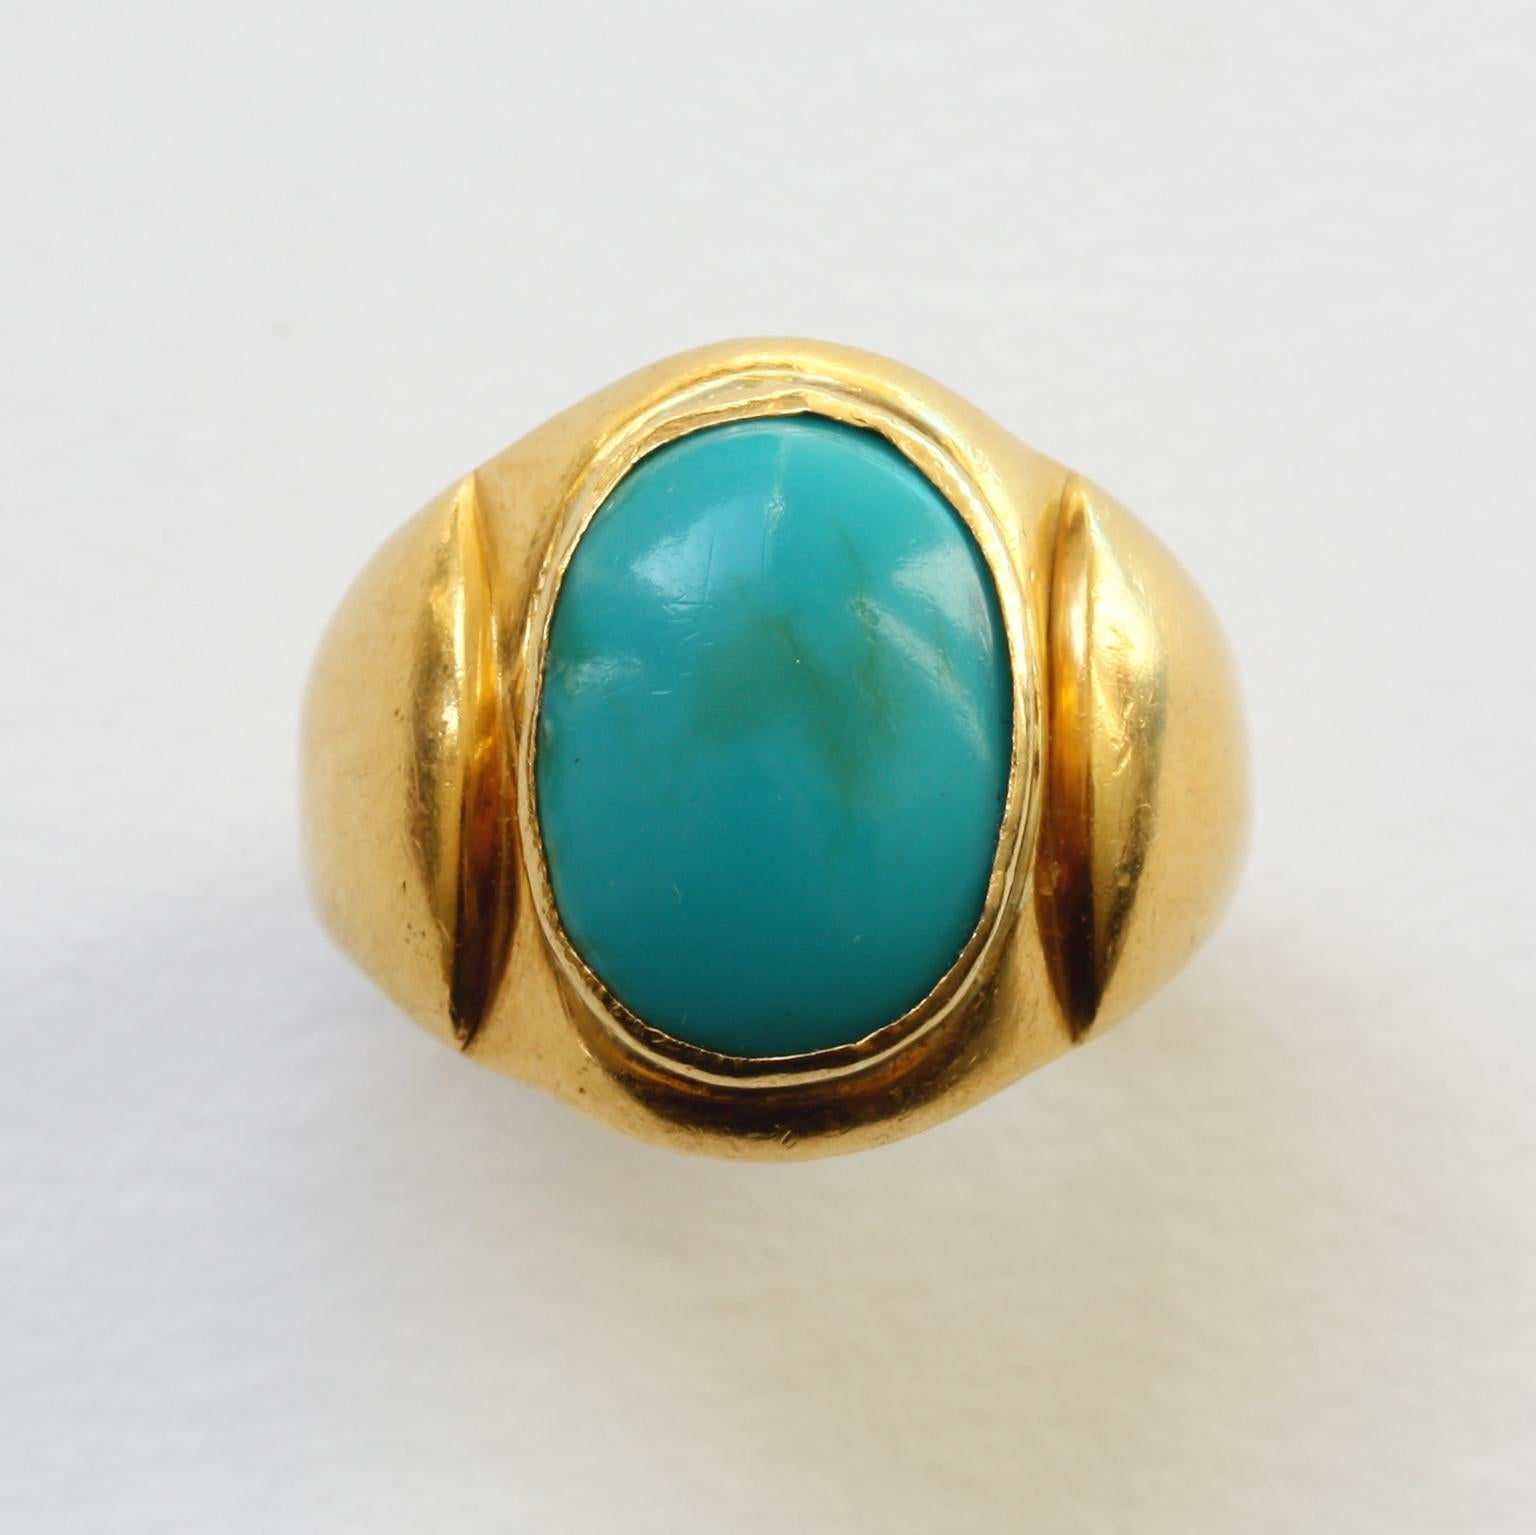 A large man’s ring 18 carat gold with a large cabochon cut turquoise, most likely Nepalese, 19th century.

ring size: 21.75 mm. 12 ½ US.
weight: 15.55 gram.
dimensions turquoise: 1.8 x 1.4 cm.
width ring: 4 – 23 mm.